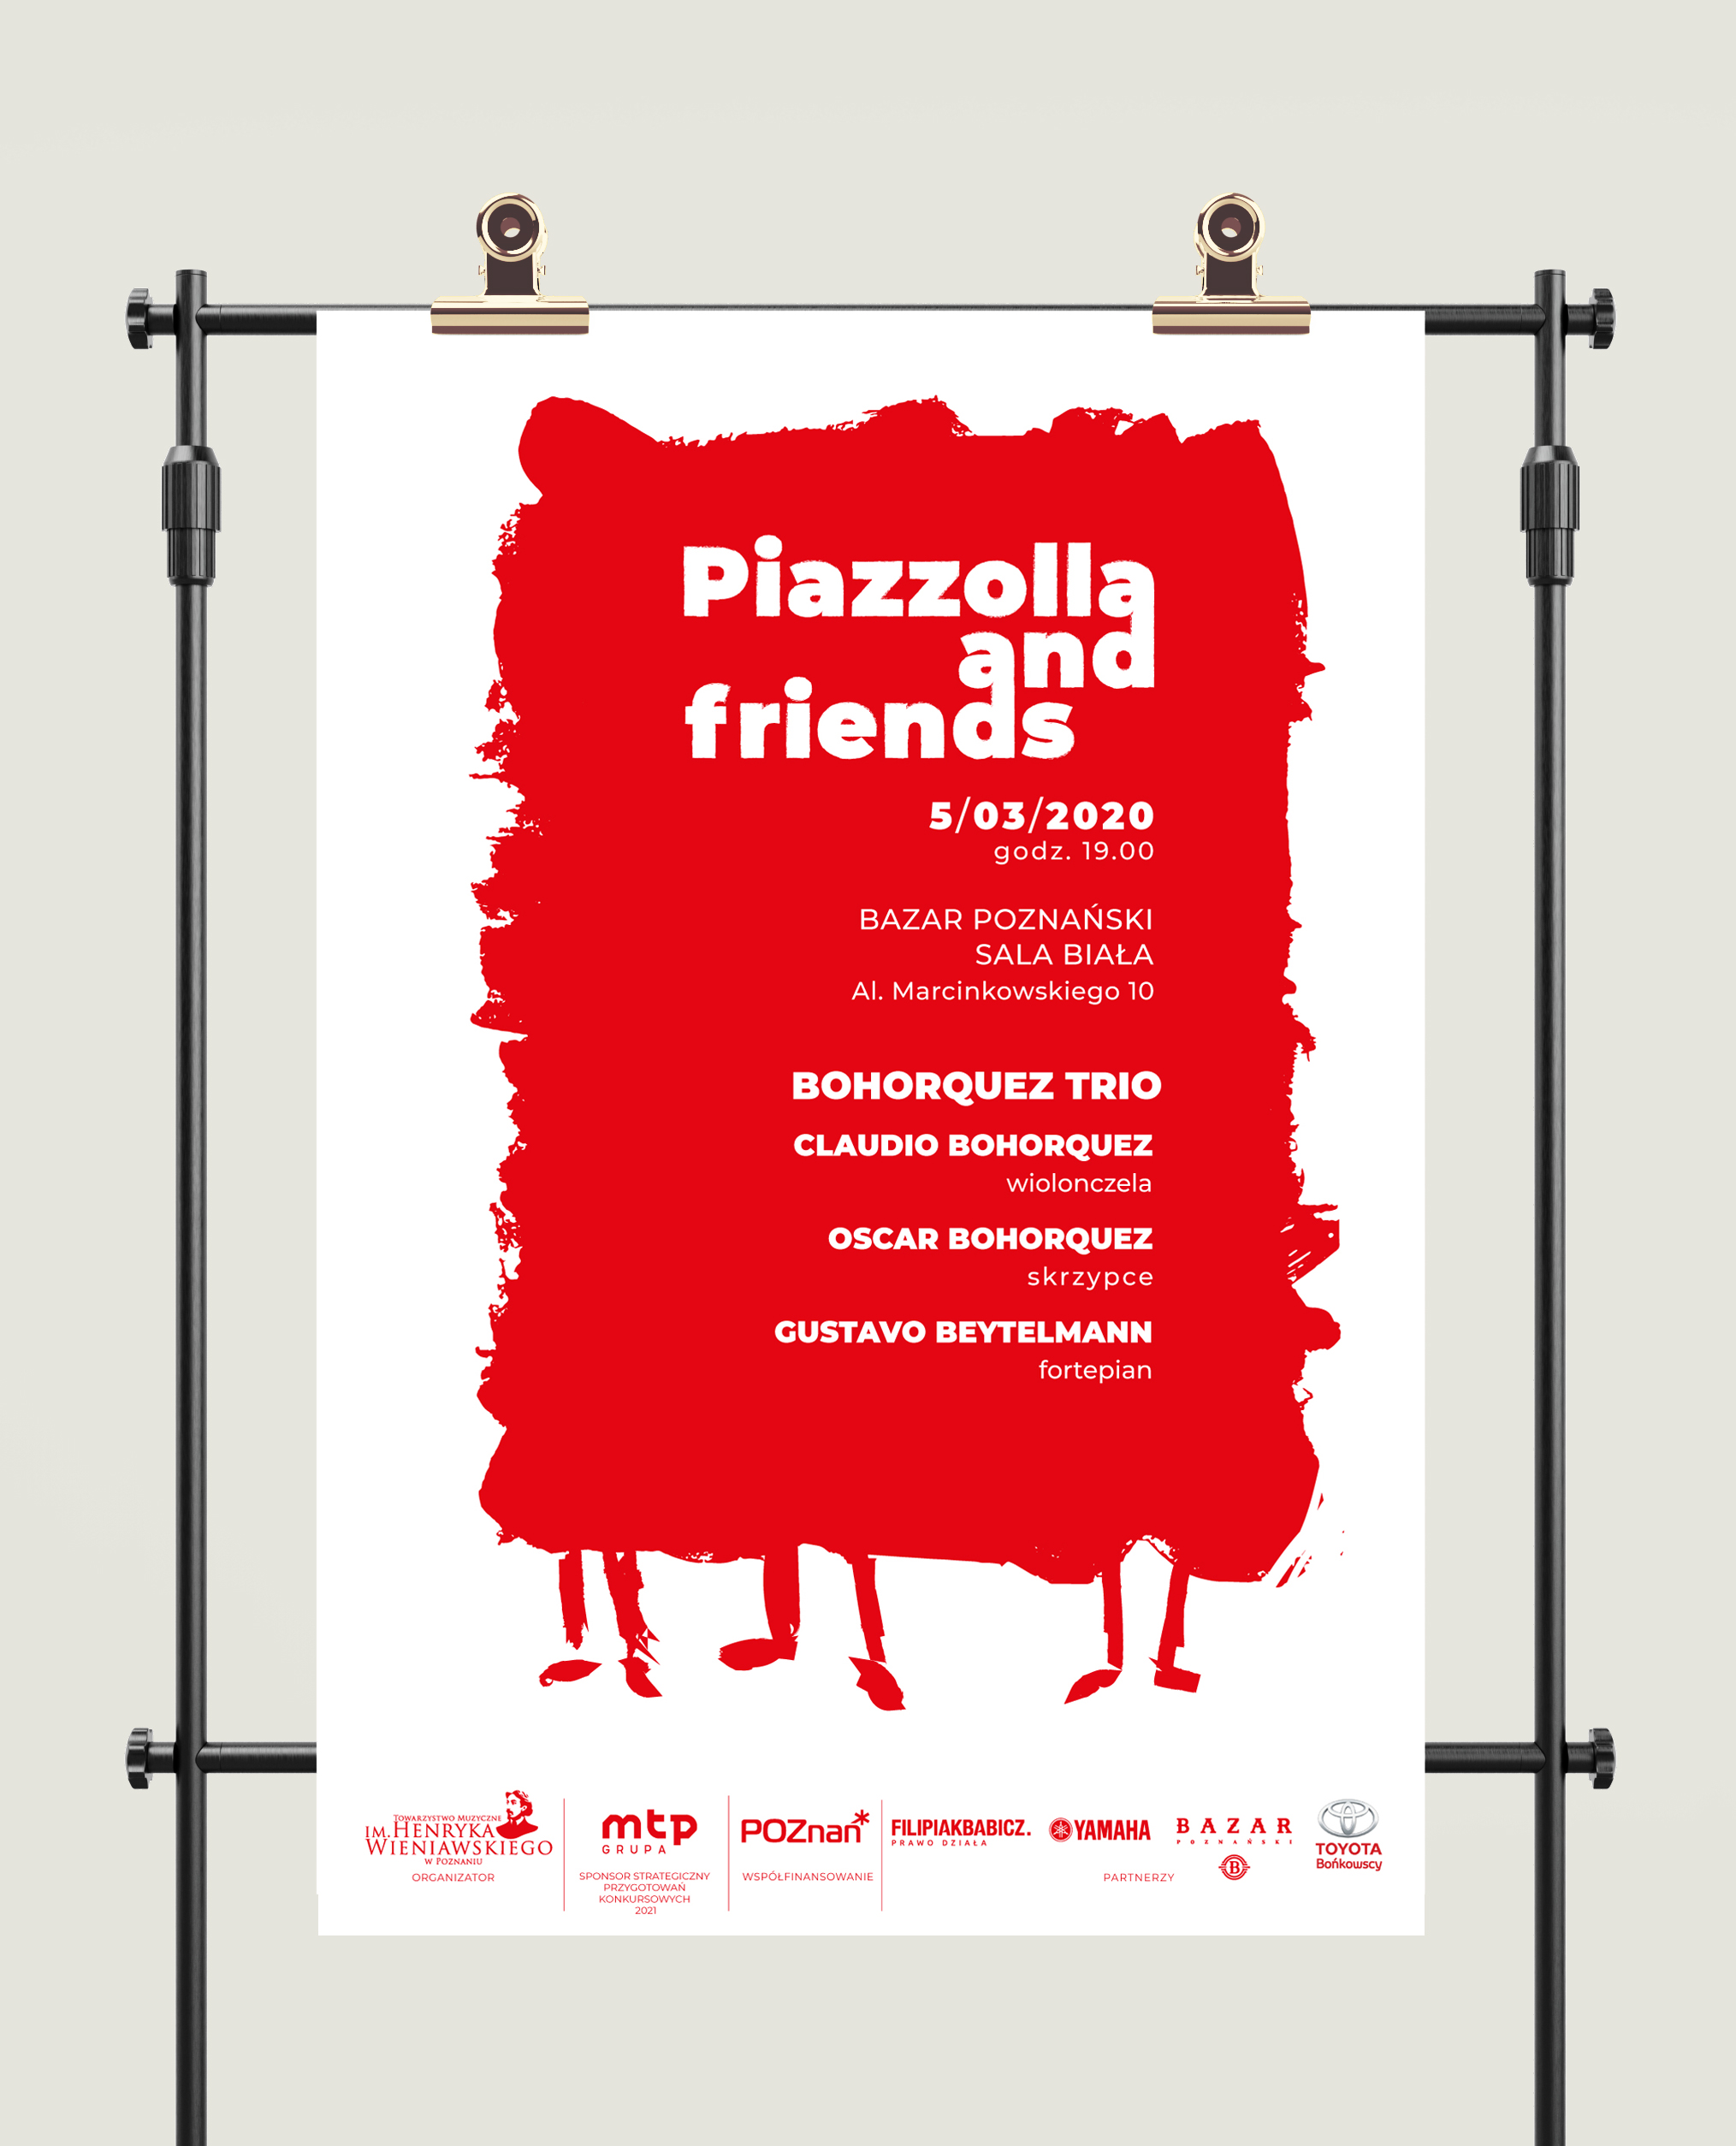 Piazzolla and friends - olika.pl